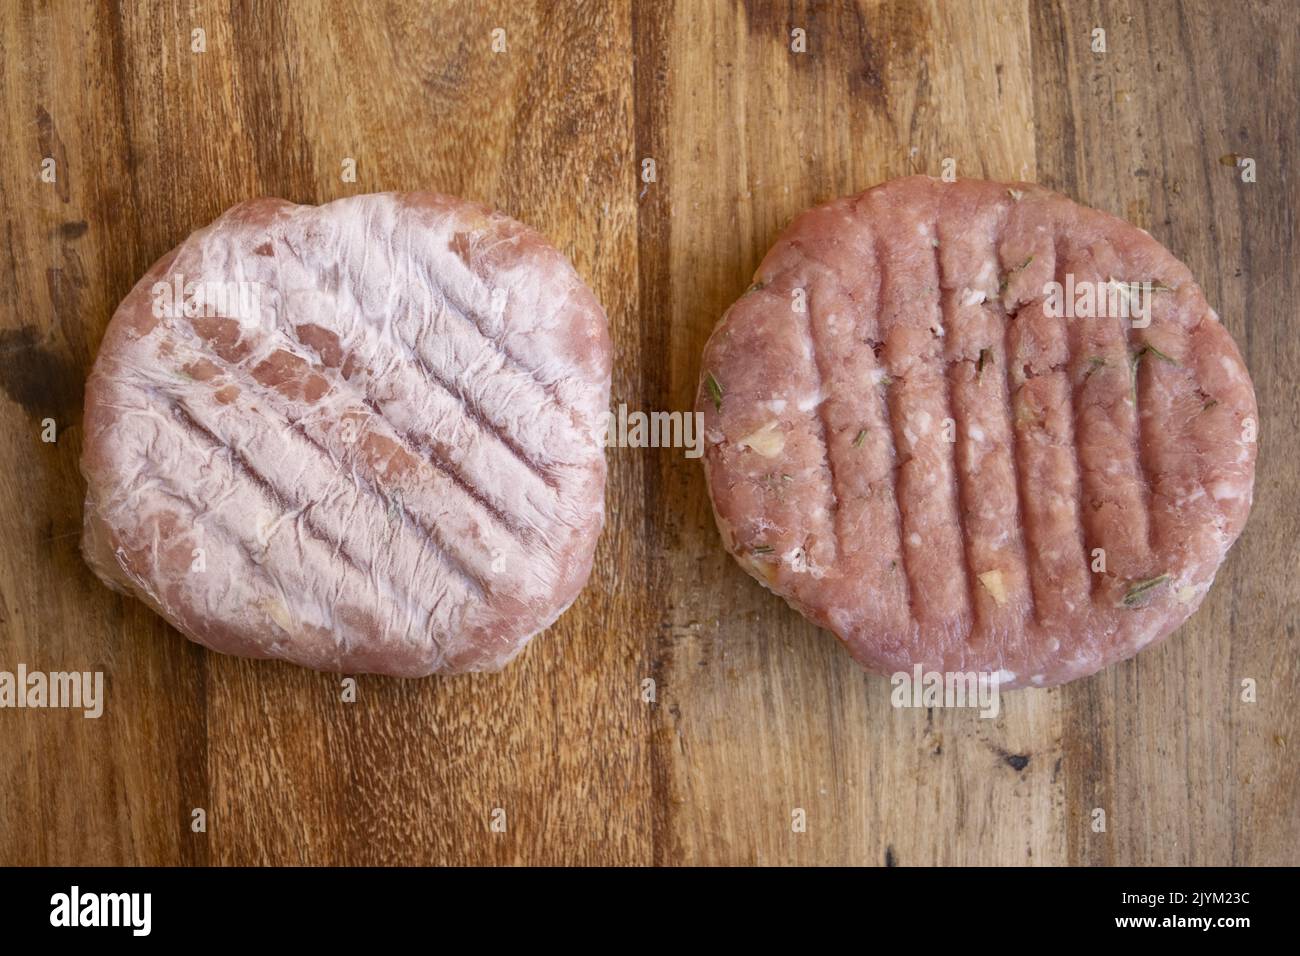 frozen assorted hamburgers of white and red meat Stock Photo